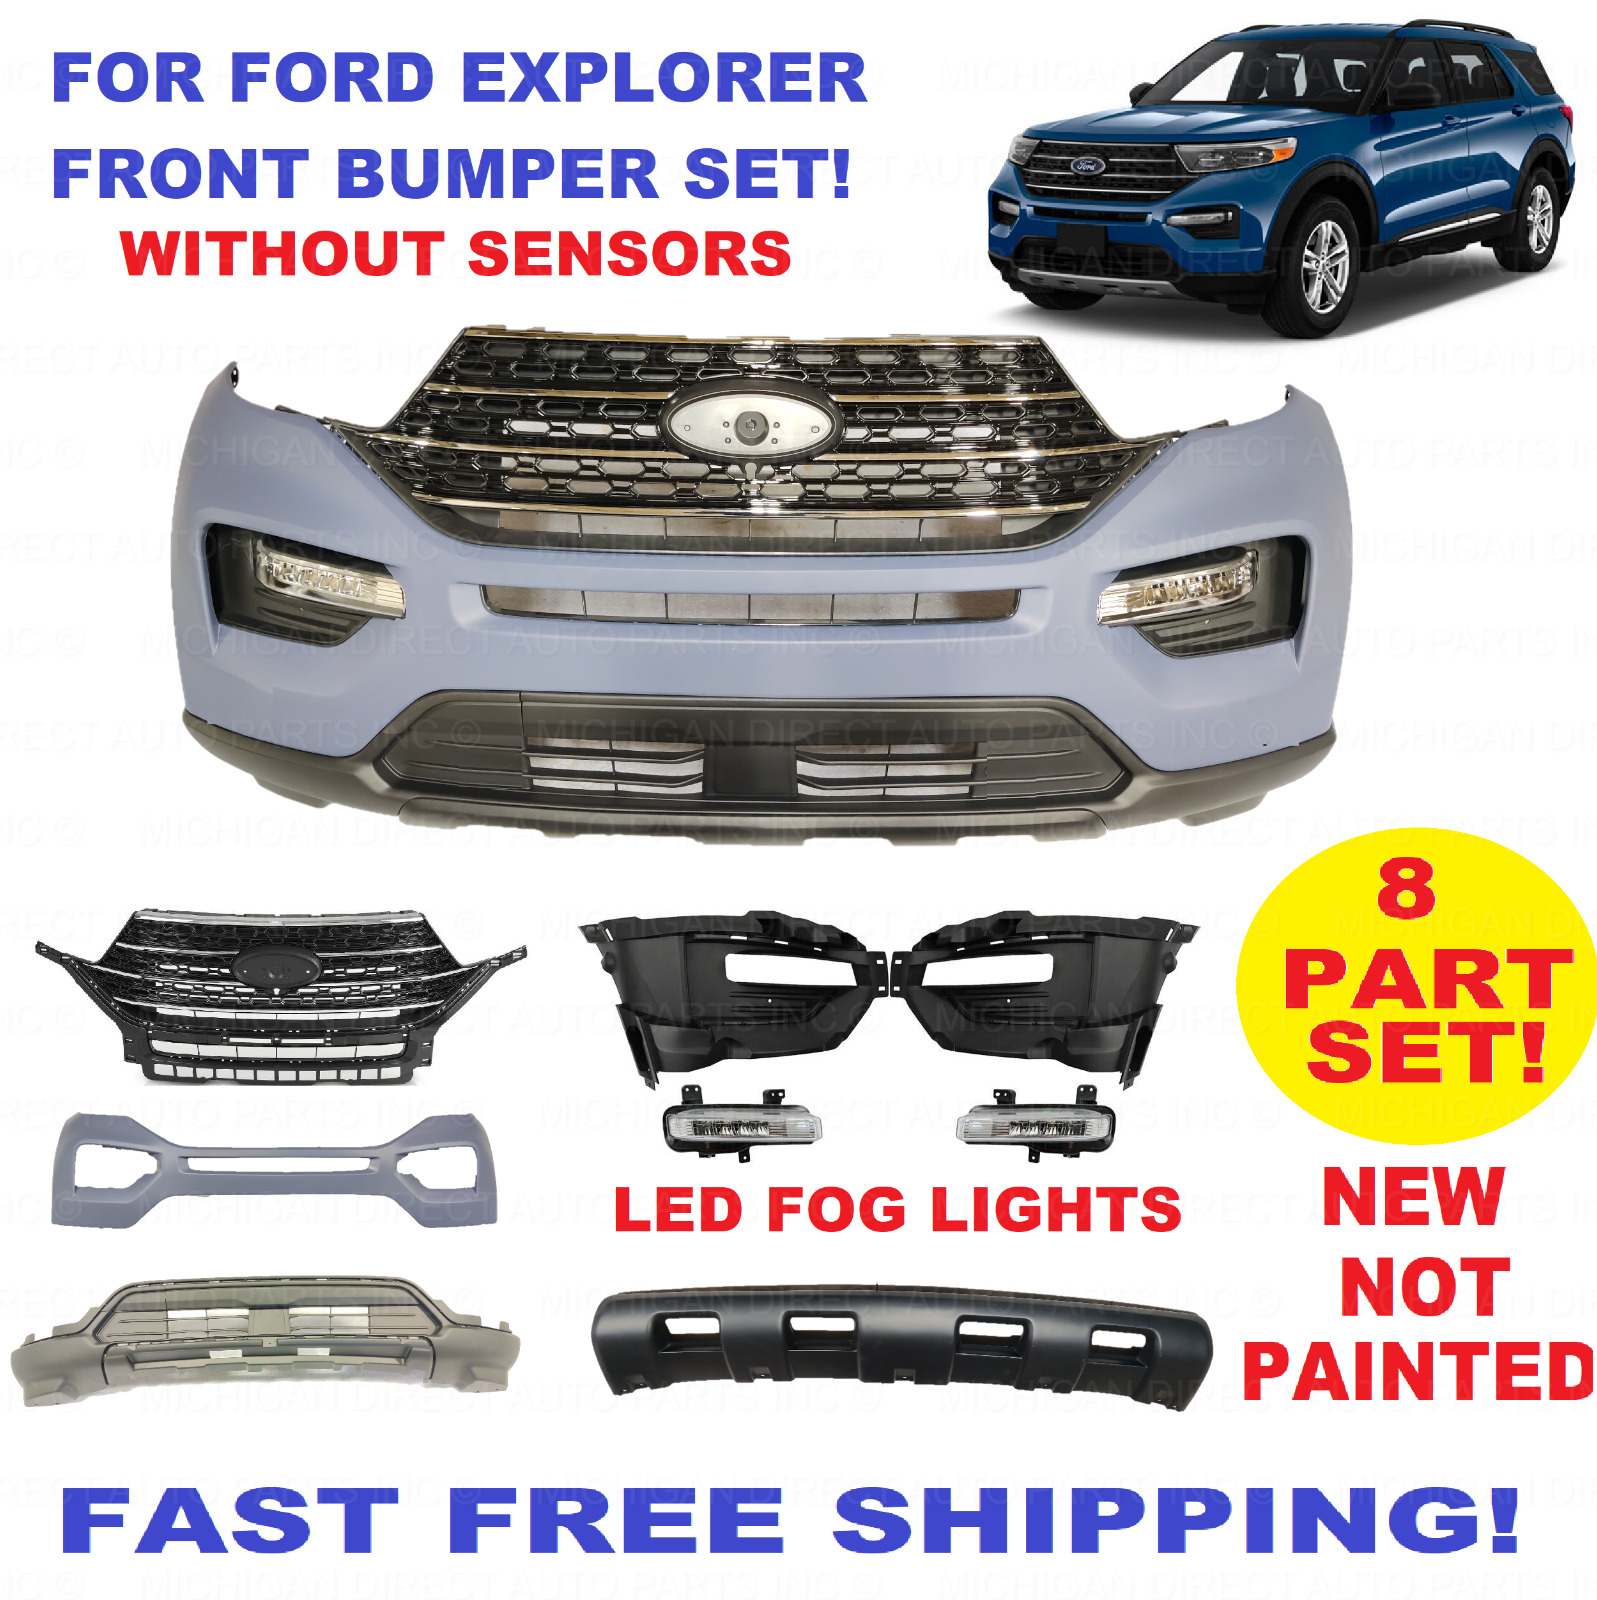 FOR FORD EXPLORER FRONT BUMPER ASSEMBLY WITH LED FOG LIGHTS GRILL SKID PLATE